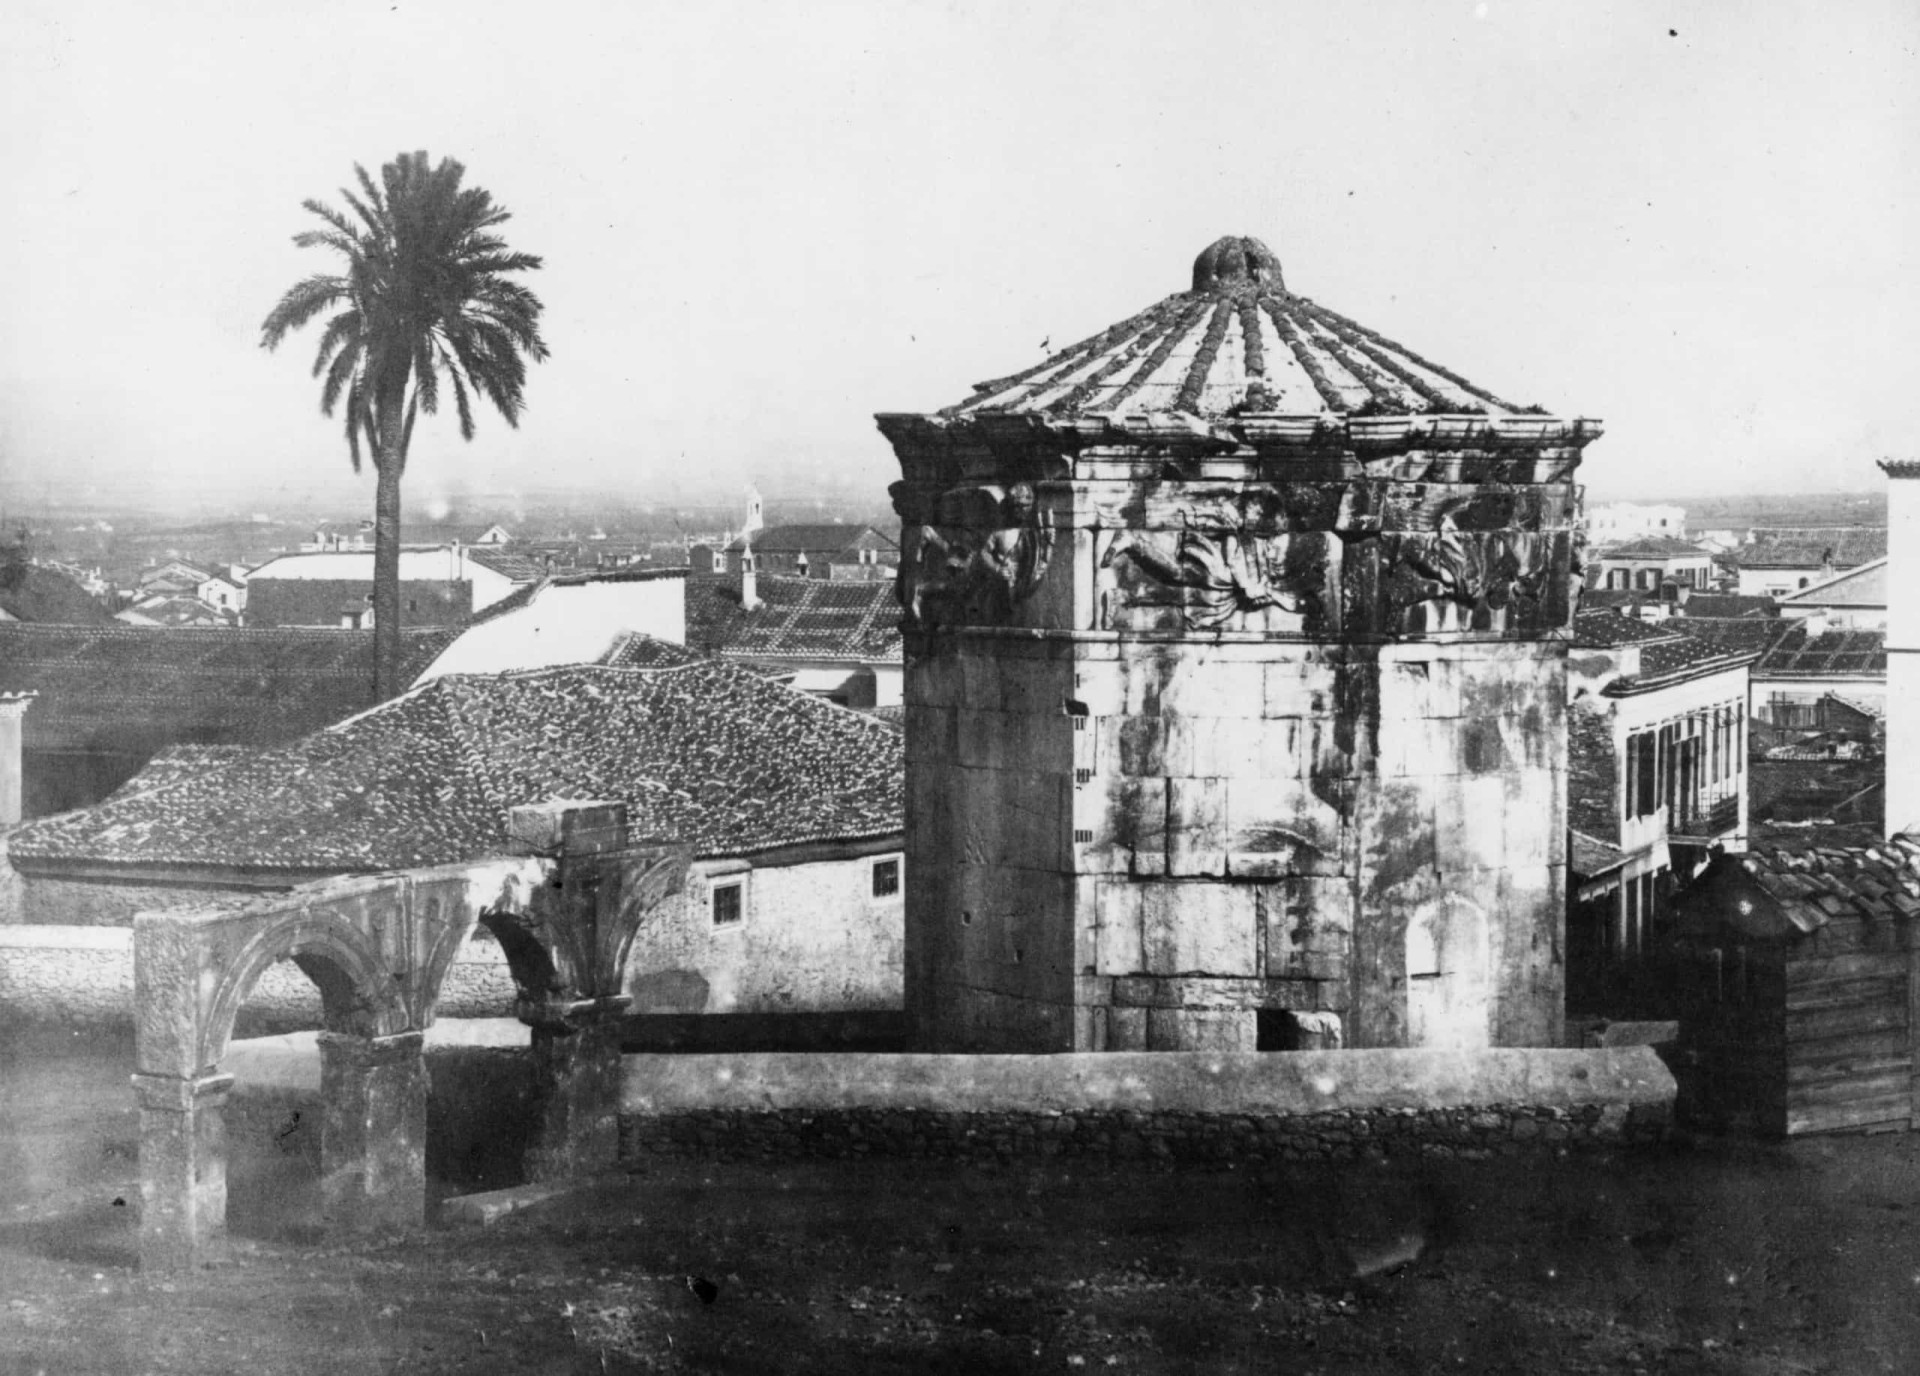 Another city with an ancient history, Athens has an archive of exciting photos. This one, taken in 1852, offers an early glimpse of the city's Tower of the Winds.<p><a href="https://www.msn.com/en-us/community/channel/vid-7xx8mnucu55yw63we9va2gwr7uihbxwc68fxqp25x6tg4ftibpra?cvid=94631541bc0f4f89bfd59158d696ad7e">Follow us and access great exclusive content every day</a></p>